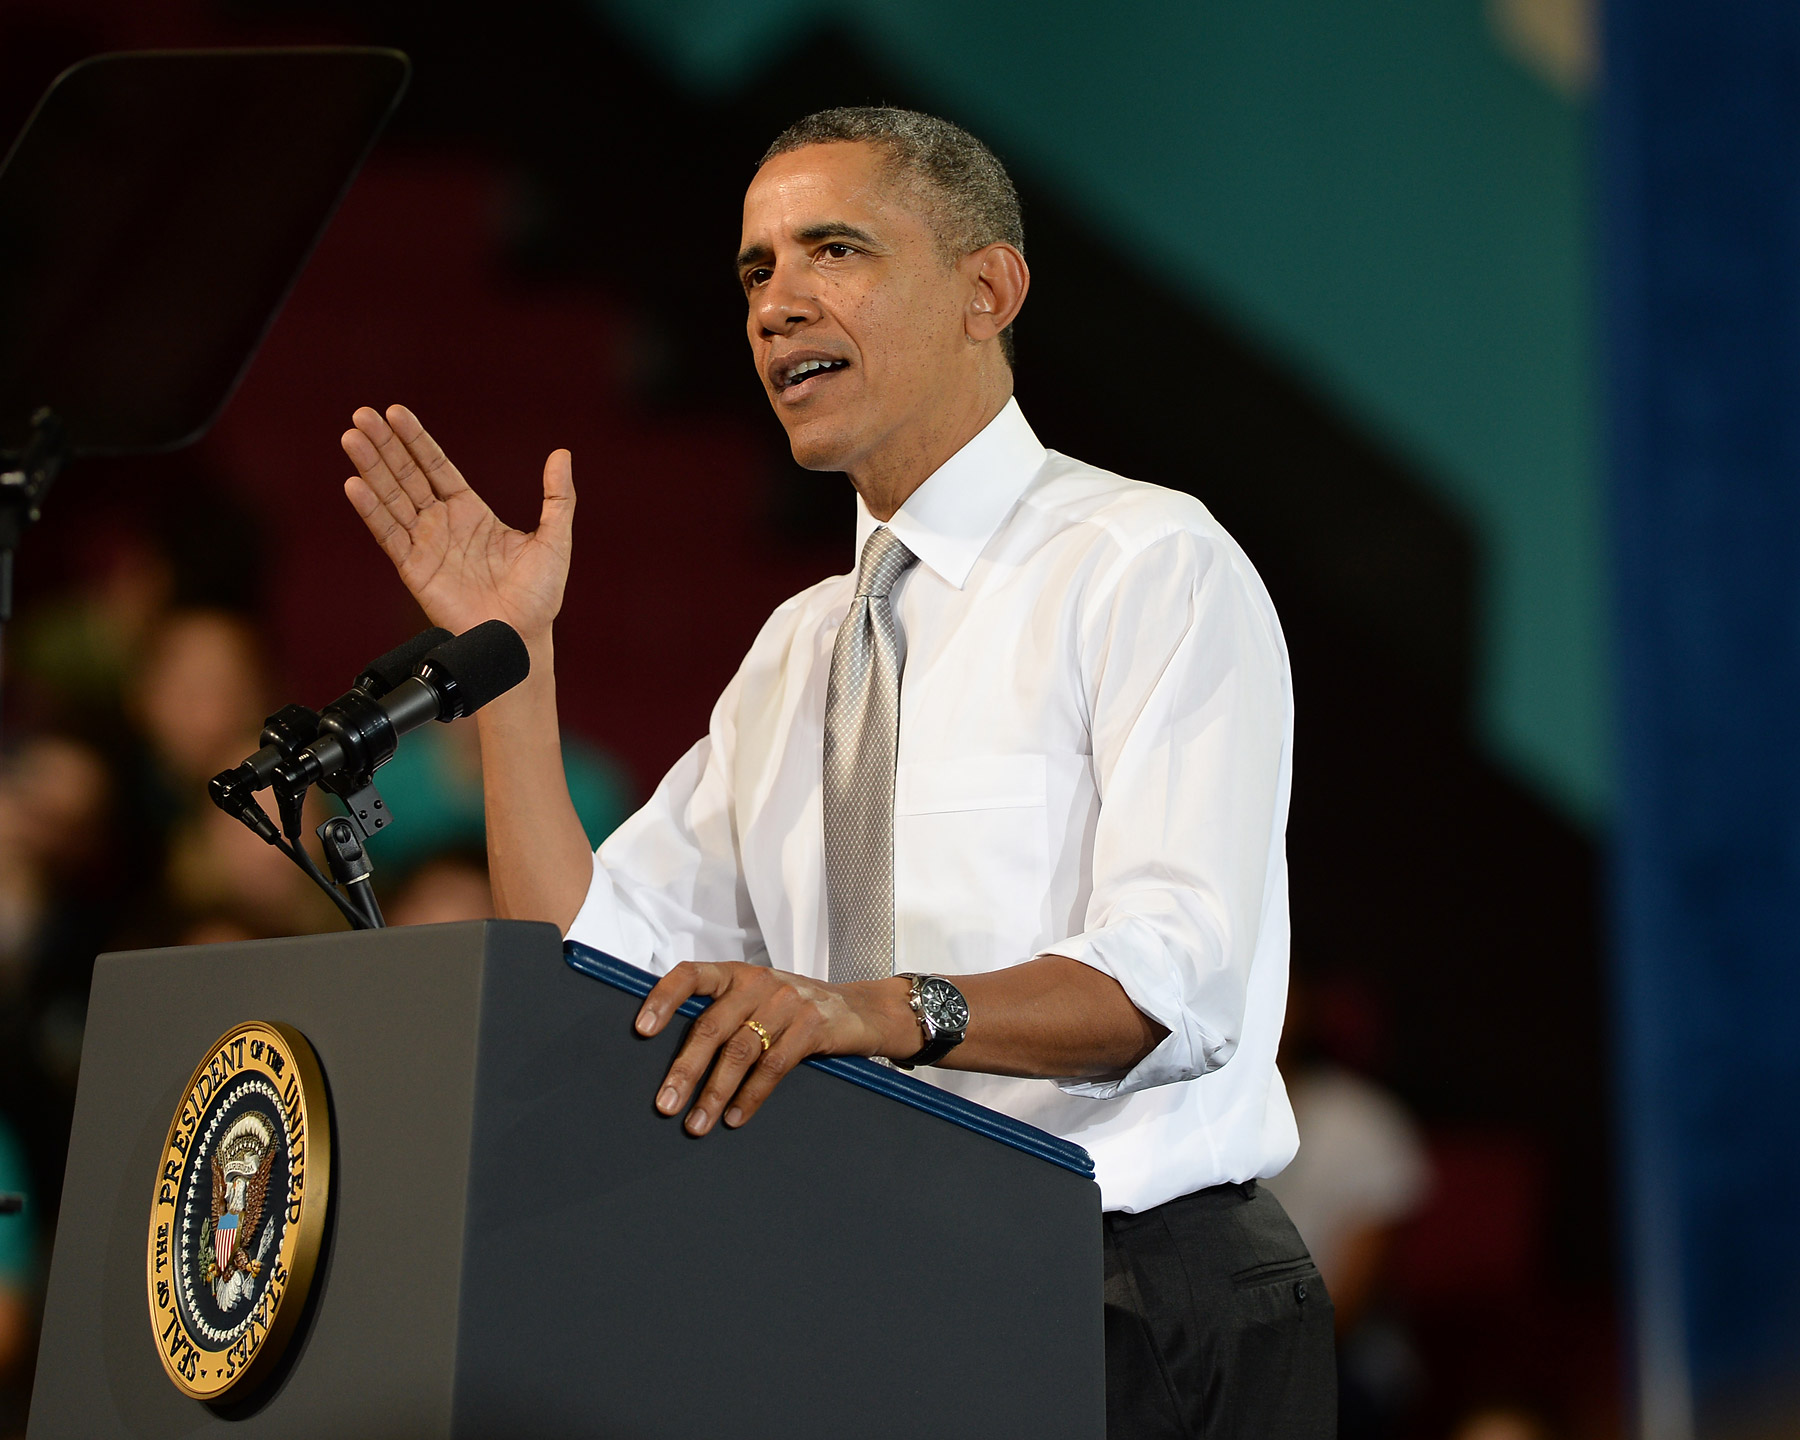 U.S. President Barack Obama delivers a speech at Coral Reef High School on March 7, 2014 in Miami.